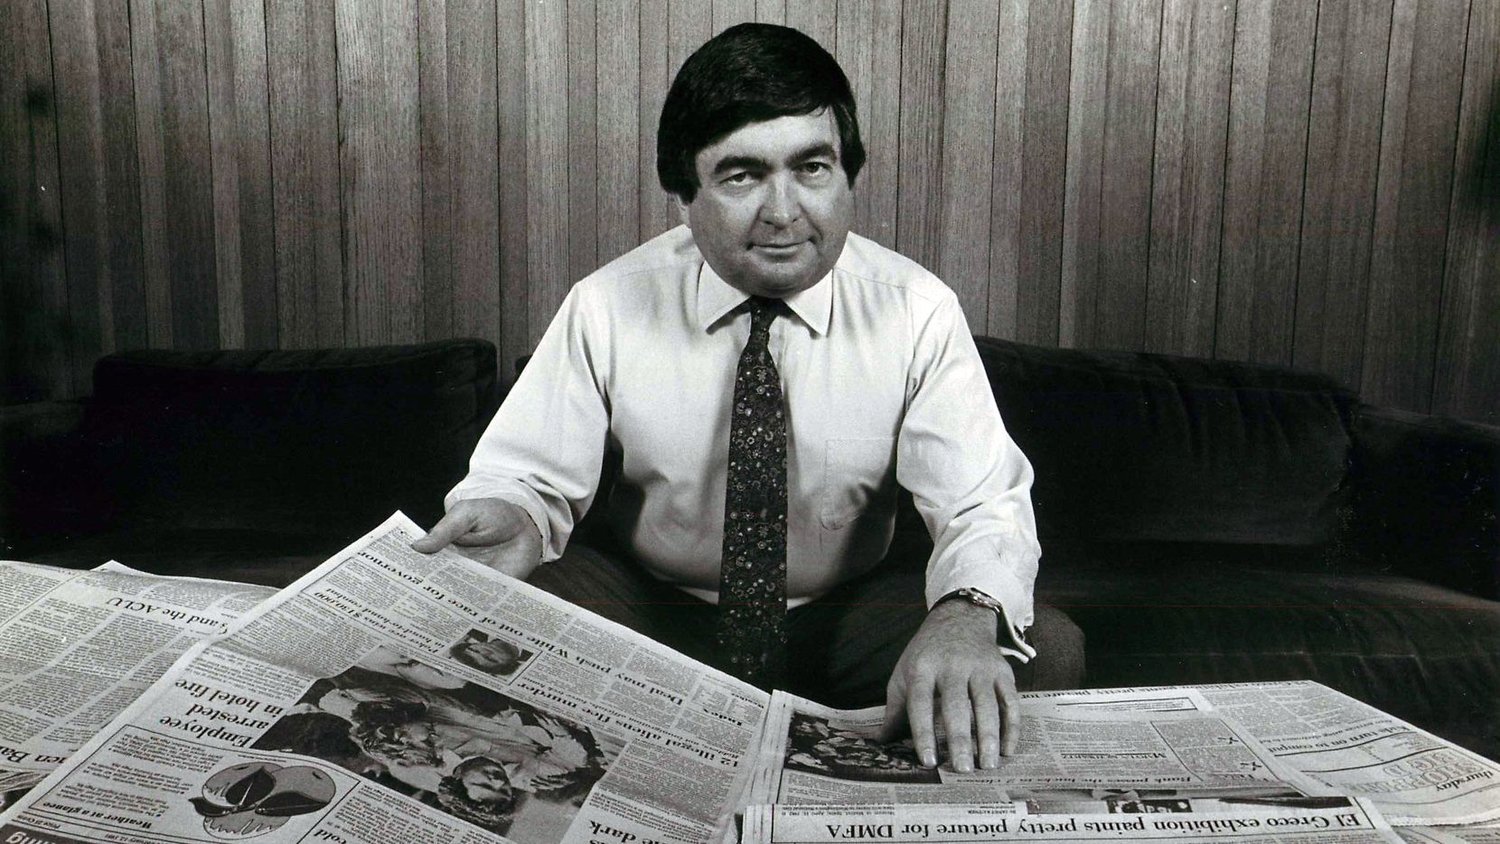 Burl Osborne, the former publisher of The Dallas Morning News, carved a legendary career based on the twin pillars of integrity and fairness. (Photo credit: The Dallas Morning News)